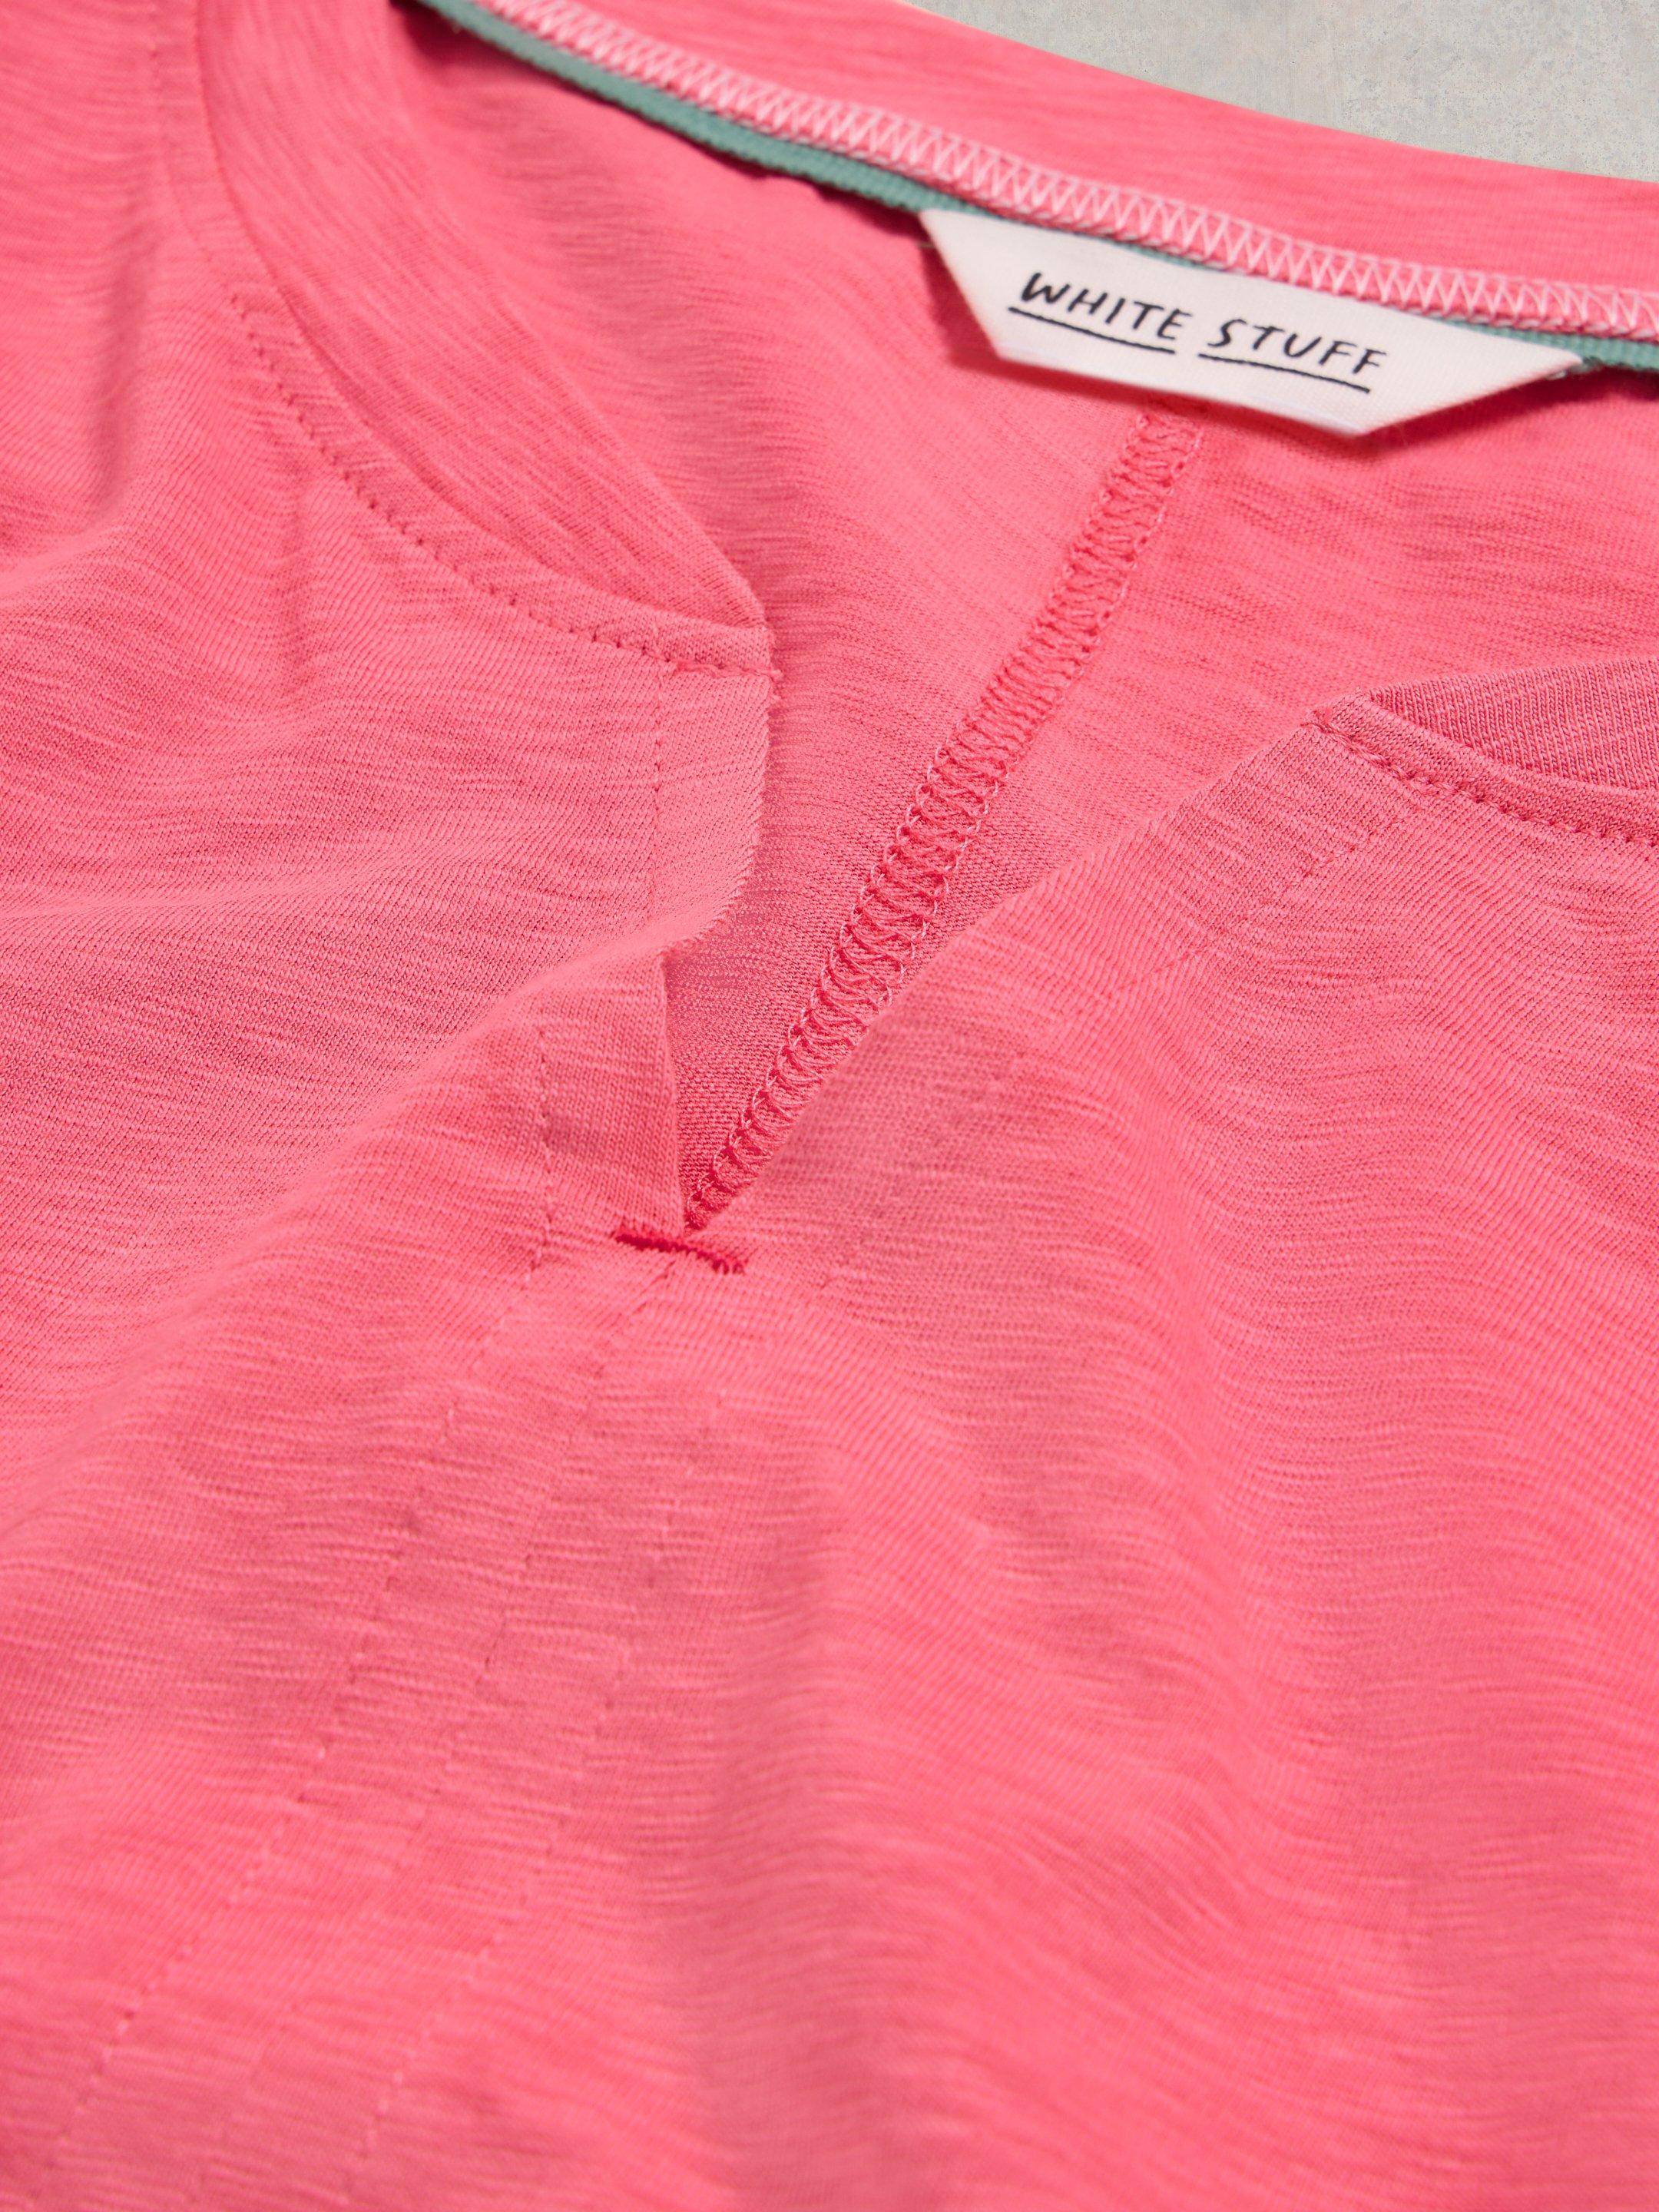 NELLY NOTCH NECK COTTON TEE in LGT PINK - FLAT DETAIL